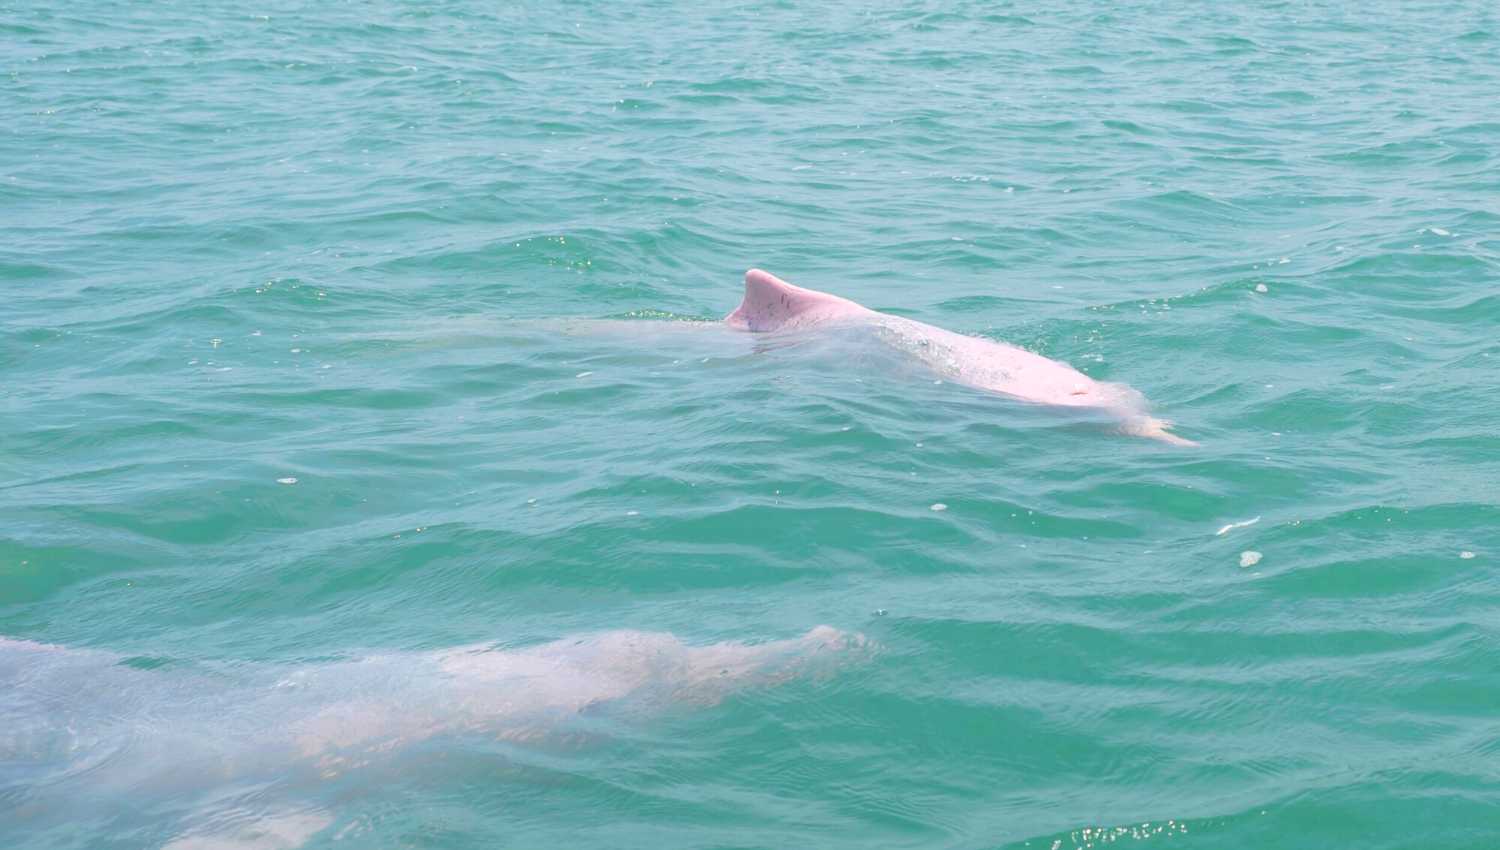 Effects of the decline in the pink dolphin population